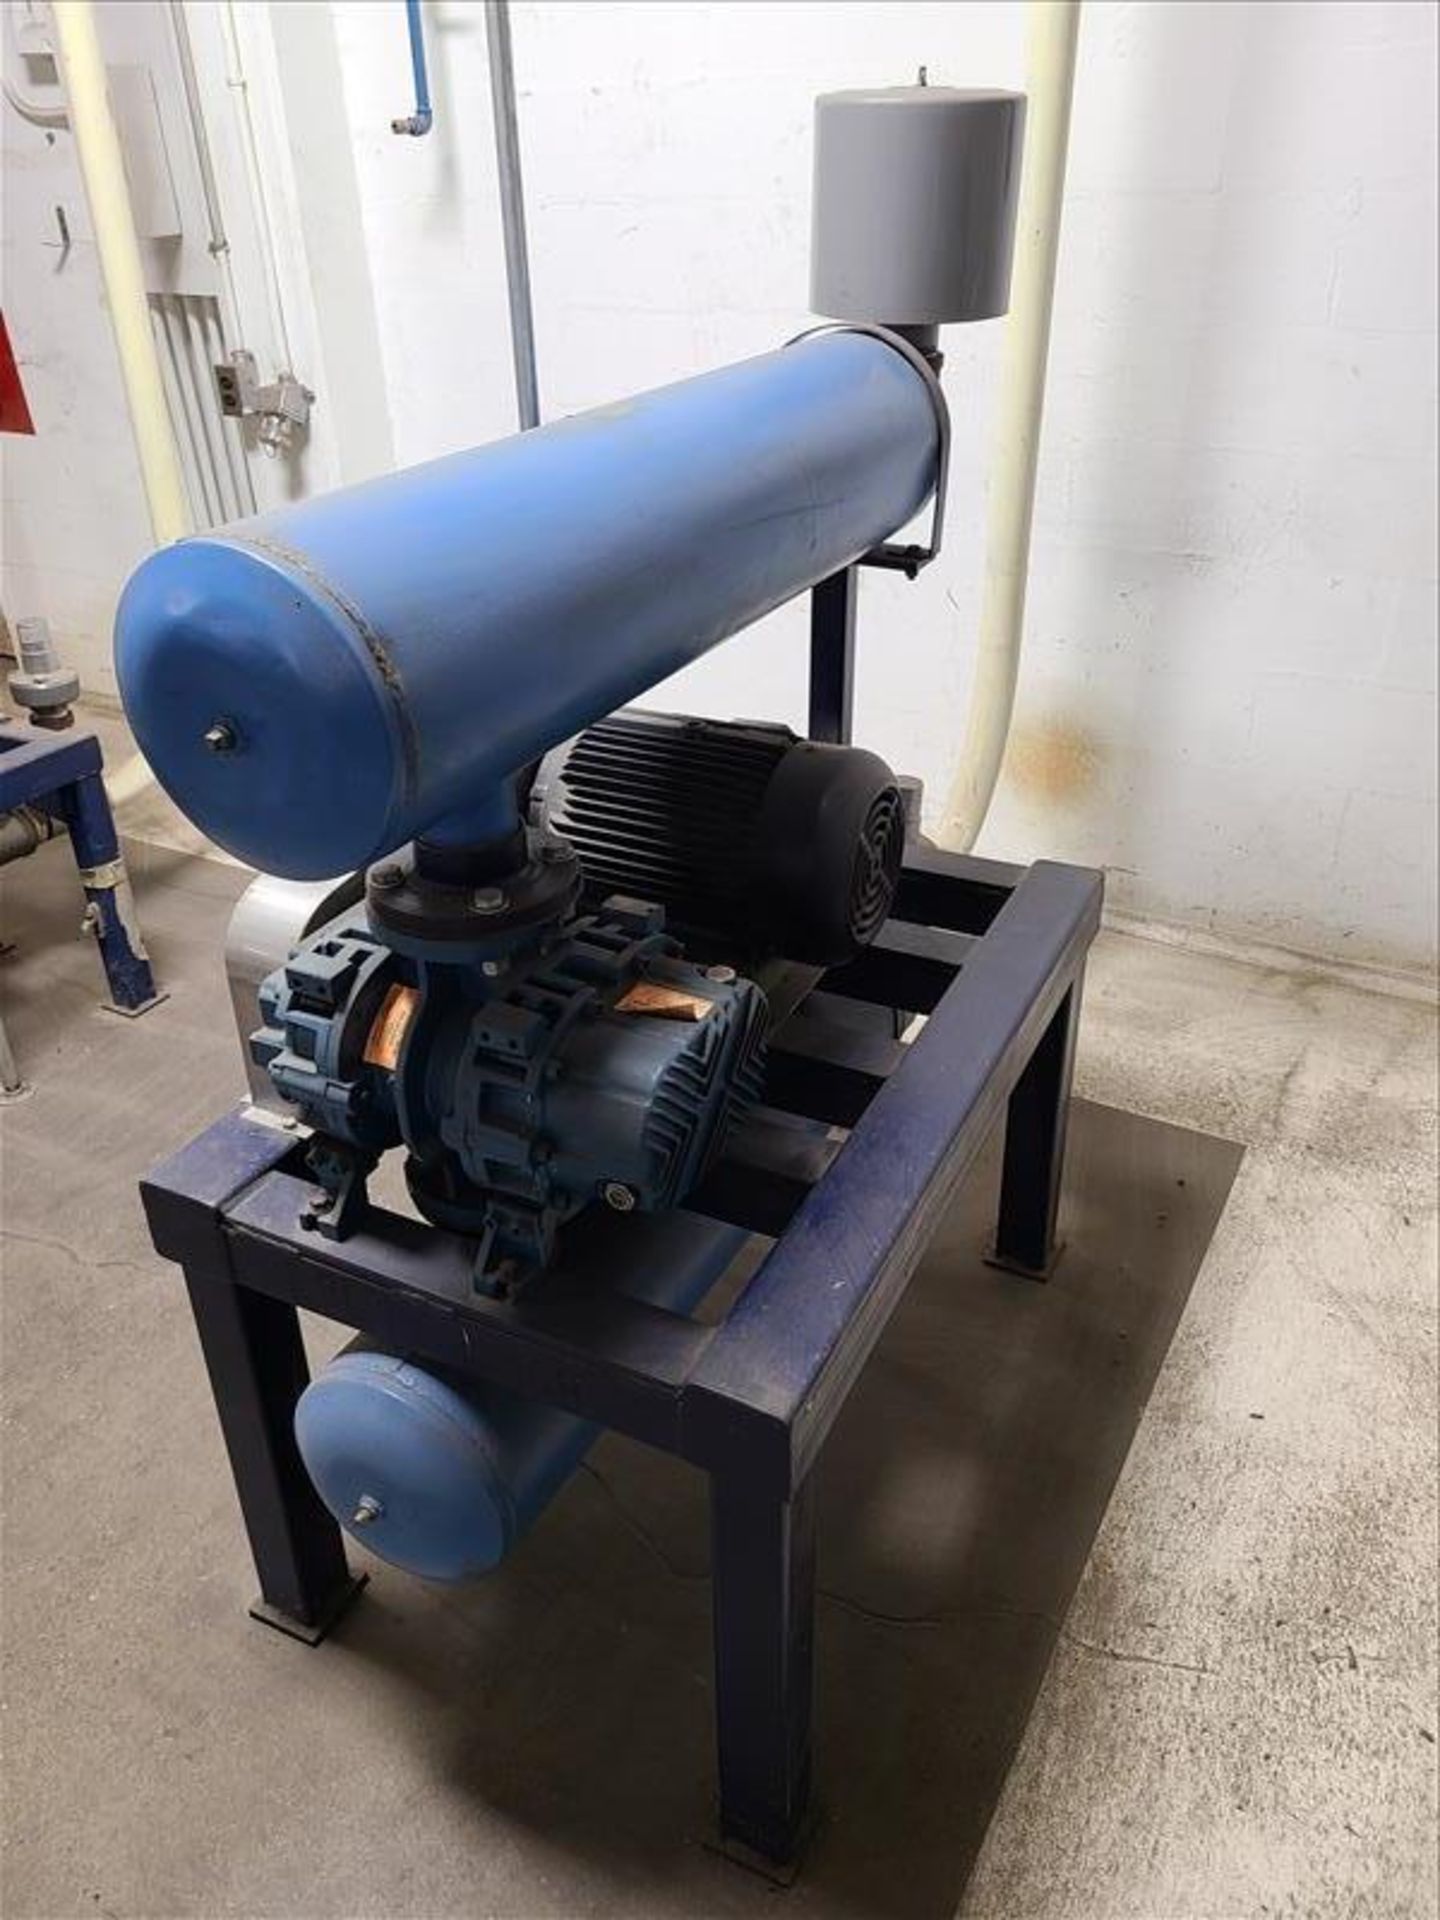 Daus blower unit, mod SPENCER, with 10 hp motor, size RB30 [Packaging Area] - Image 2 of 2